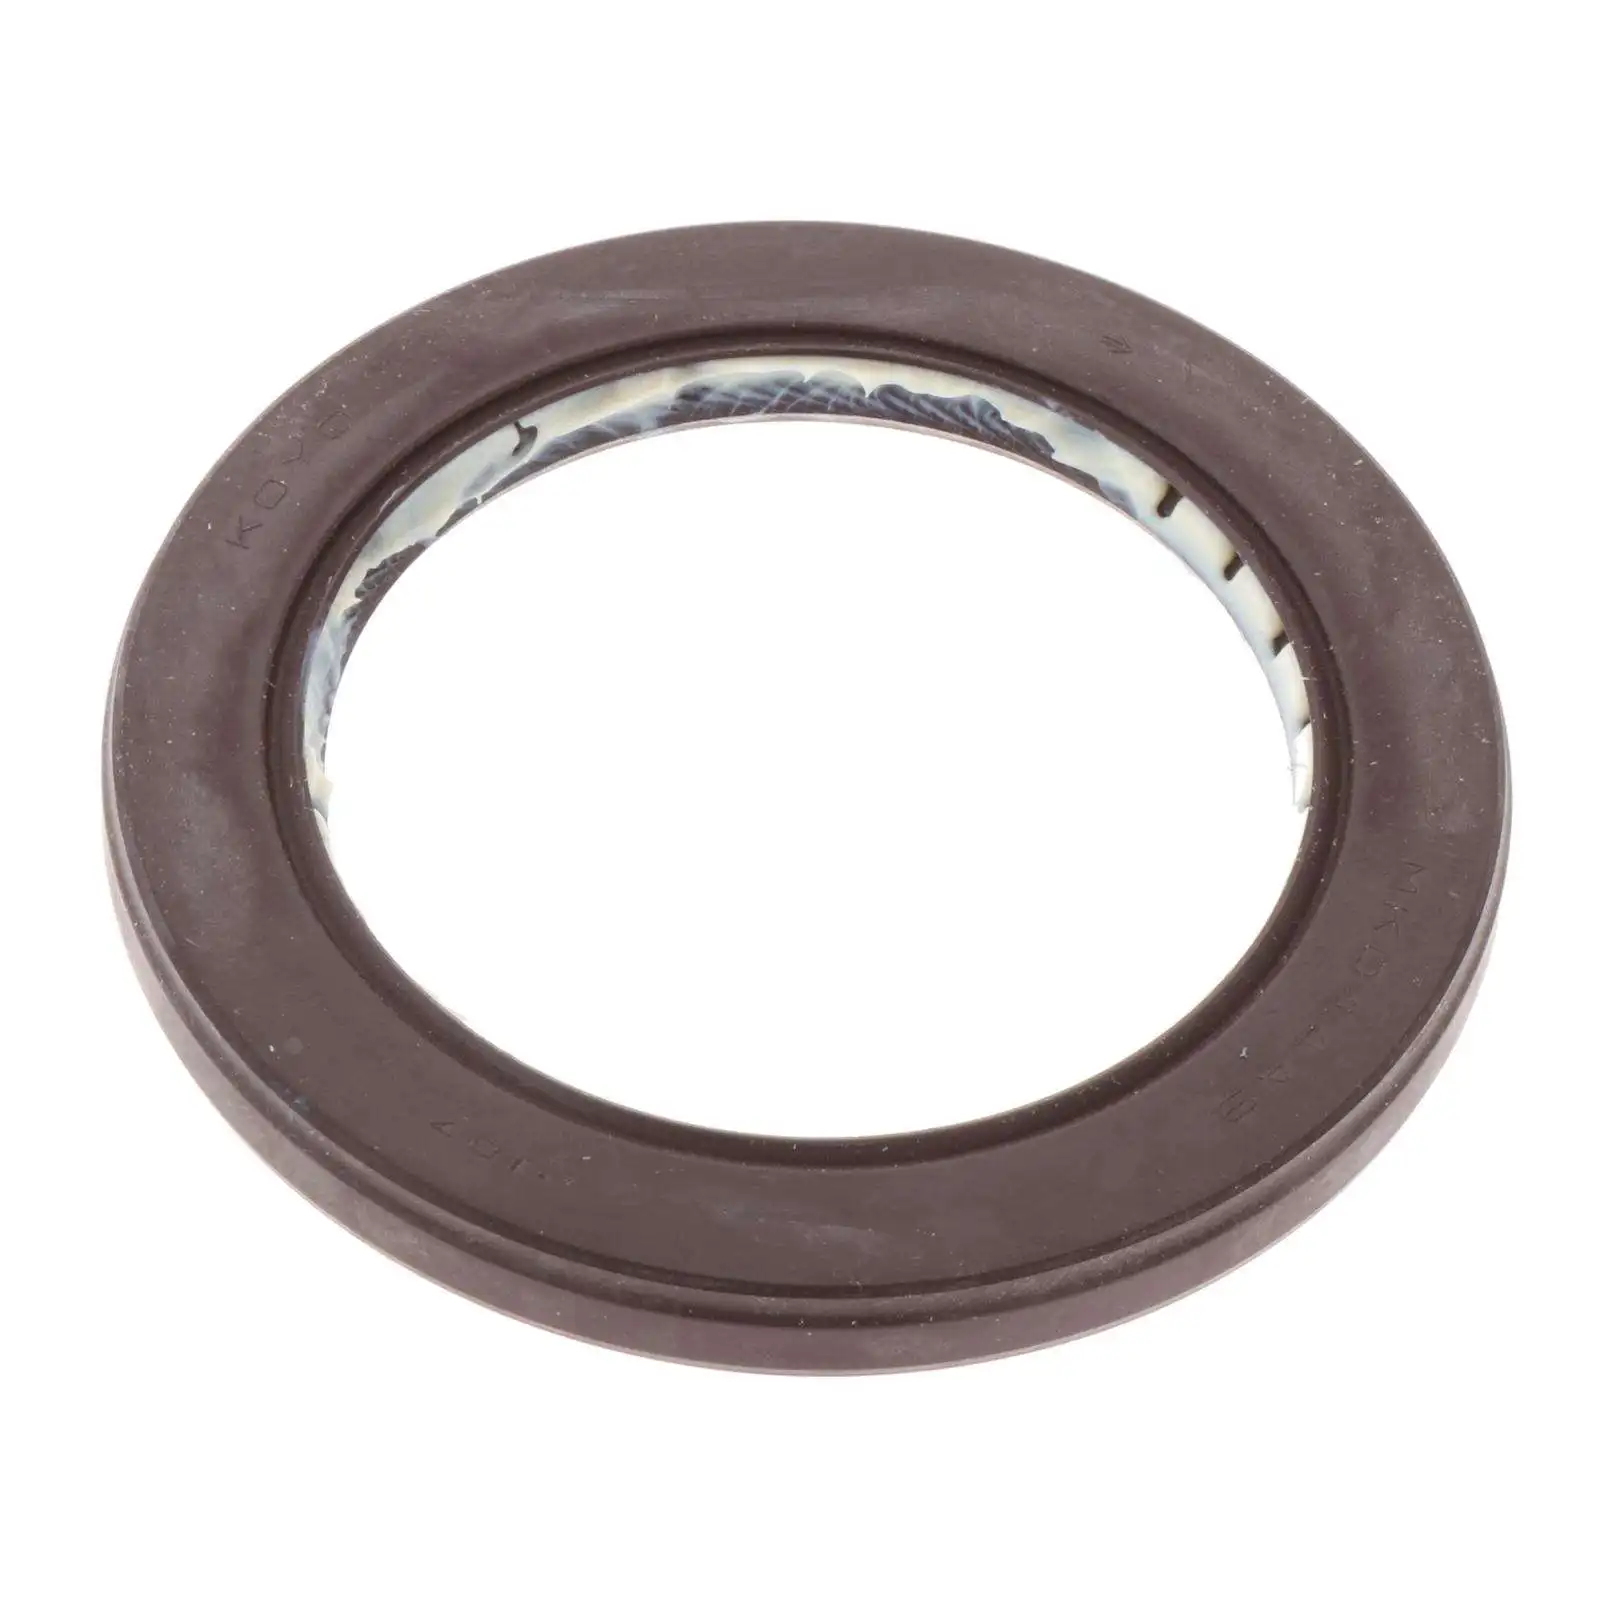 Oil Seal for Volkswagen Fit for 09G Transmission Professional Replacement Spare Parts